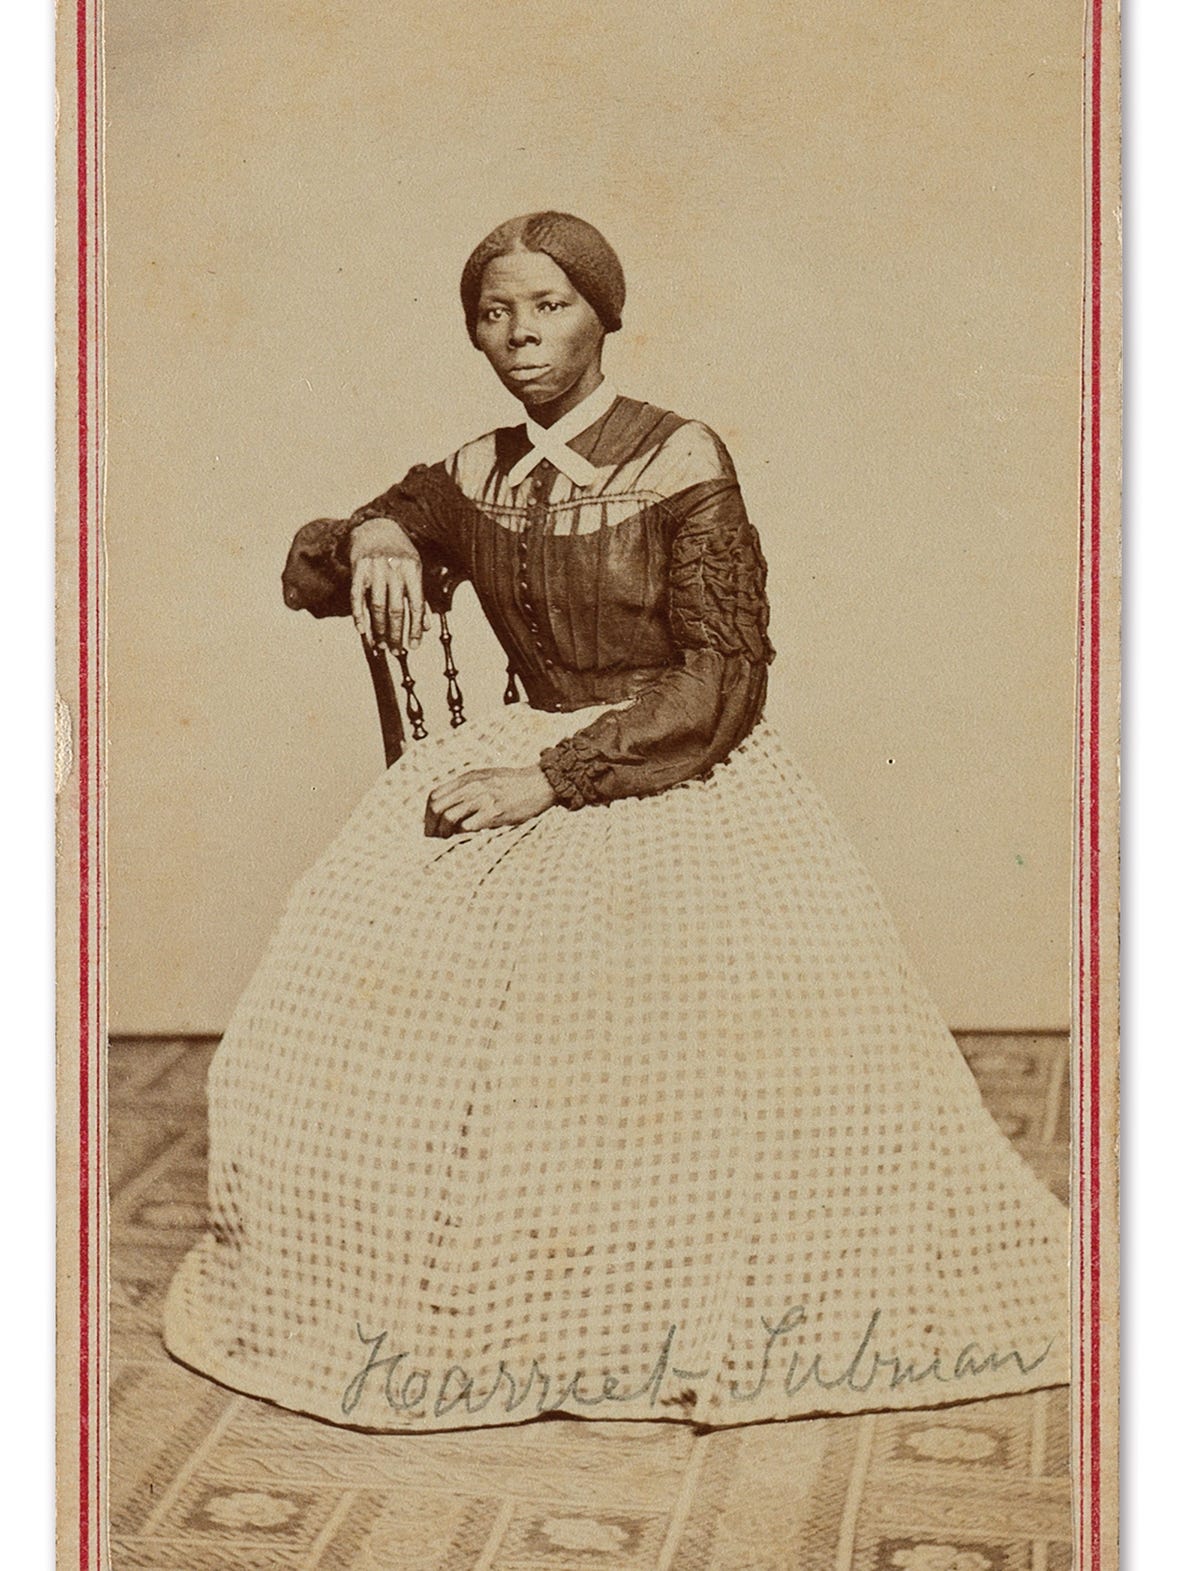 New Photo Shows Beautiful Resilient Harriet Tubman